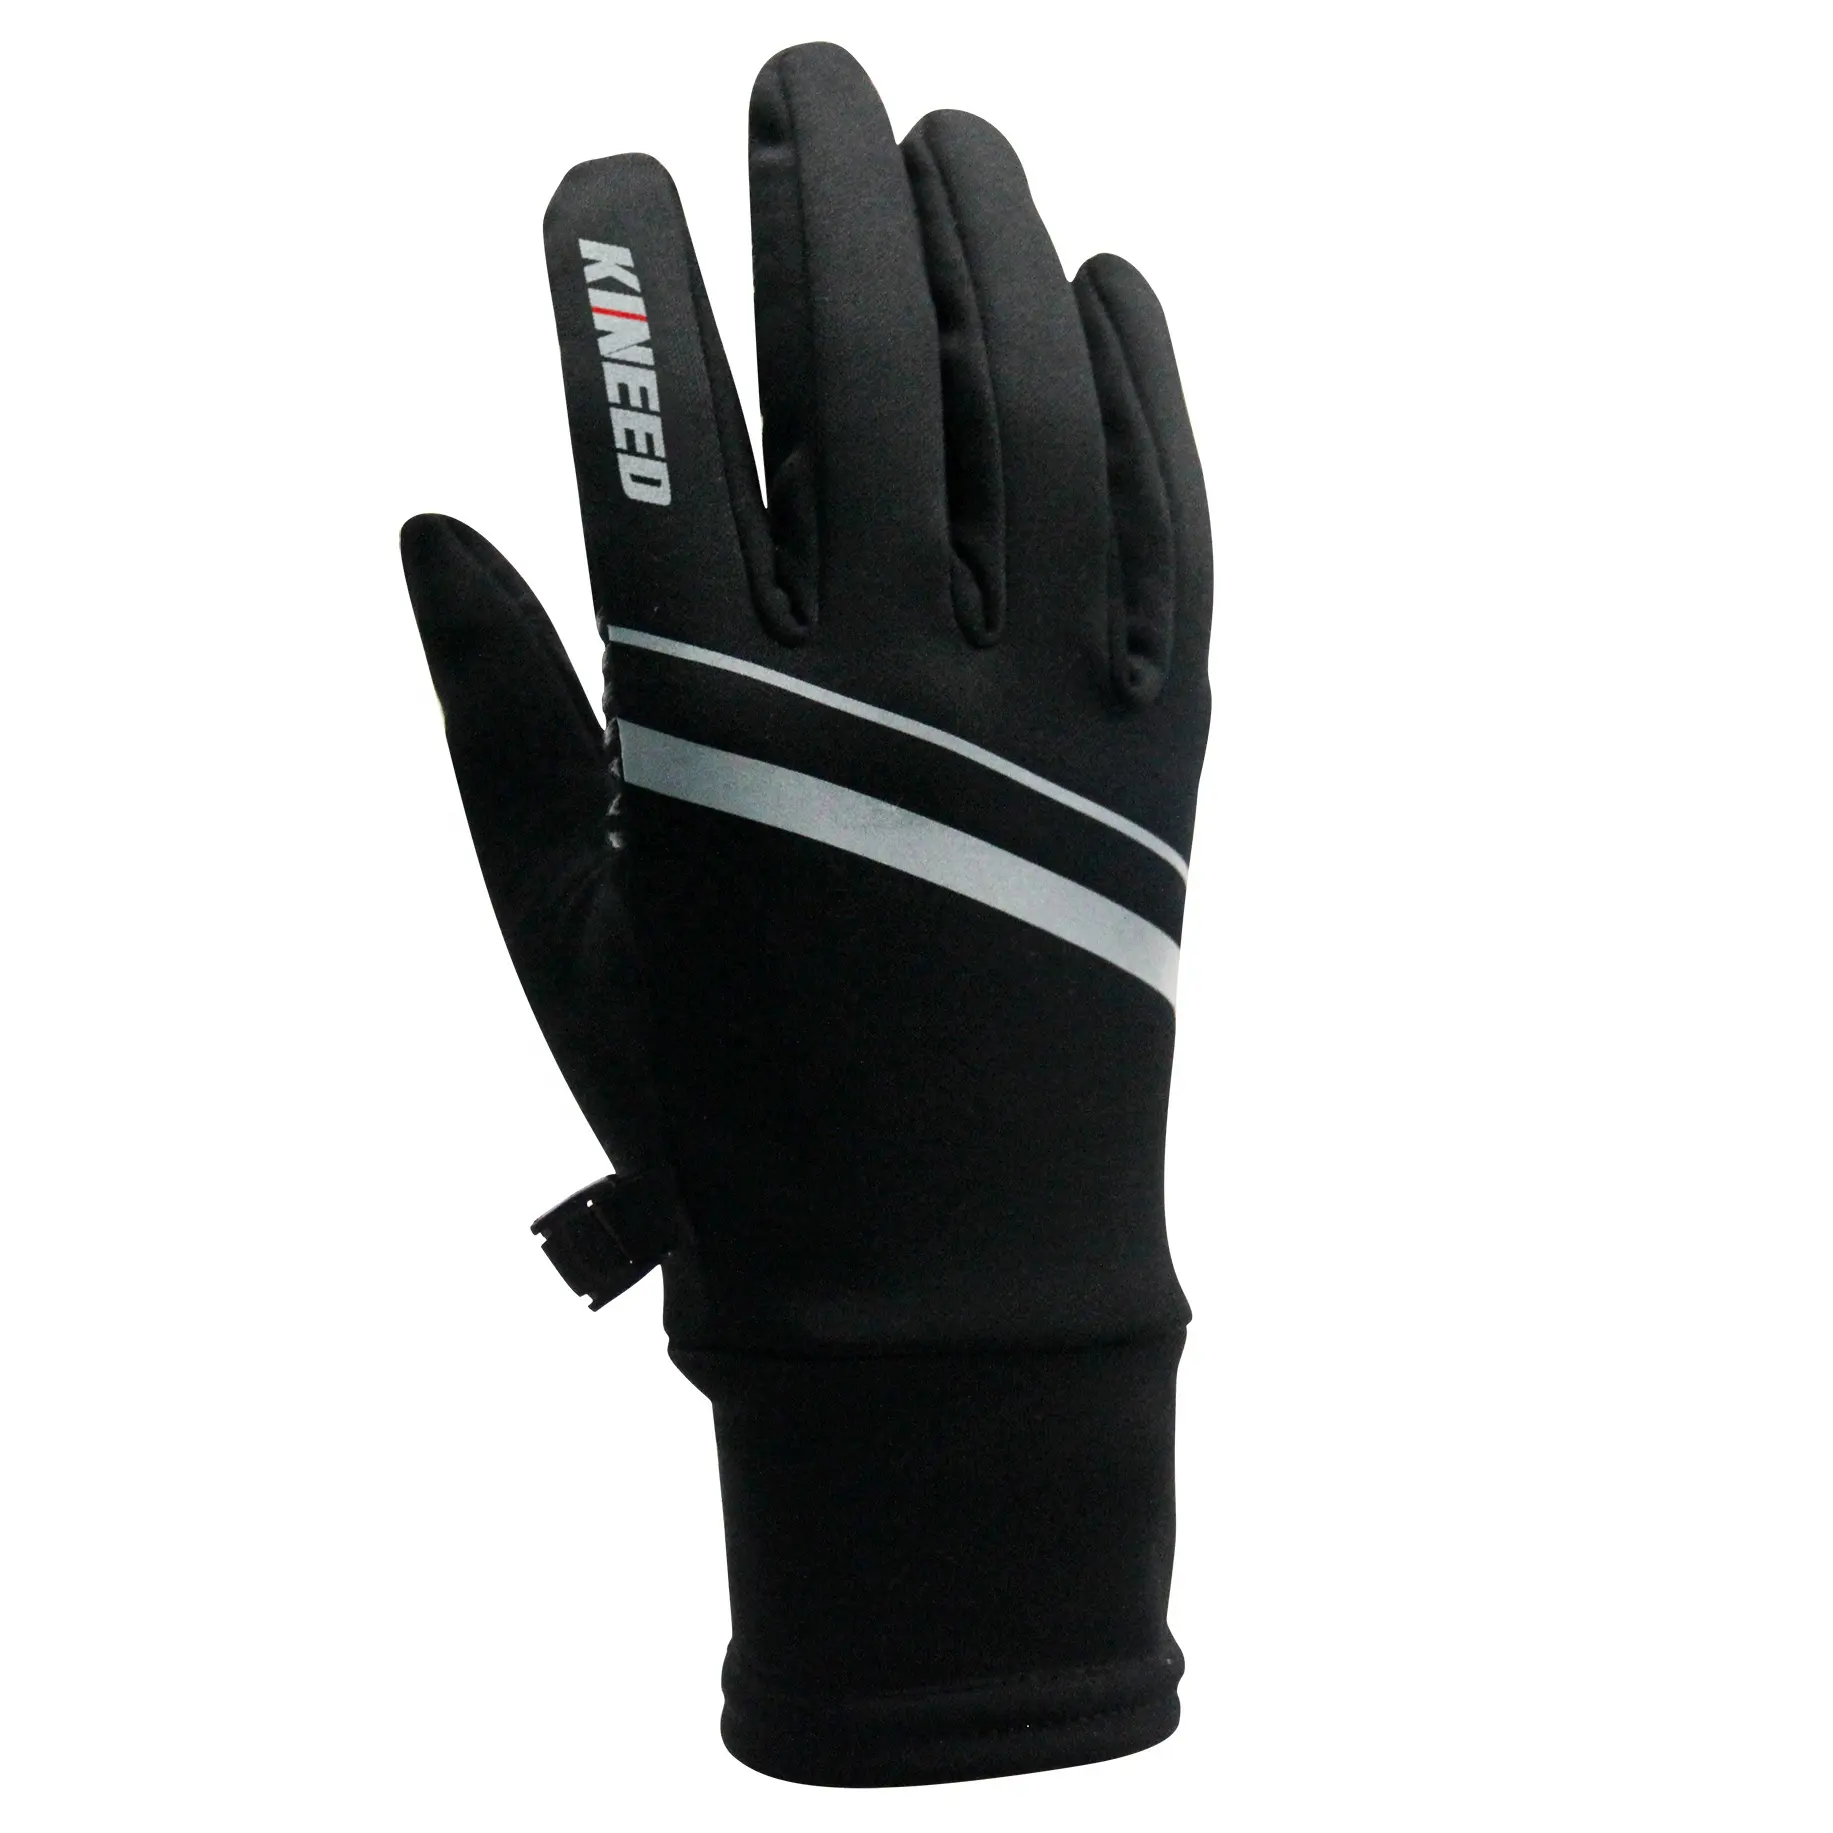 Bike Gloves OEM ODM Motorcycle Bike Gloves Breathable Riding Gloves Cycling Bicycle Race Gloves